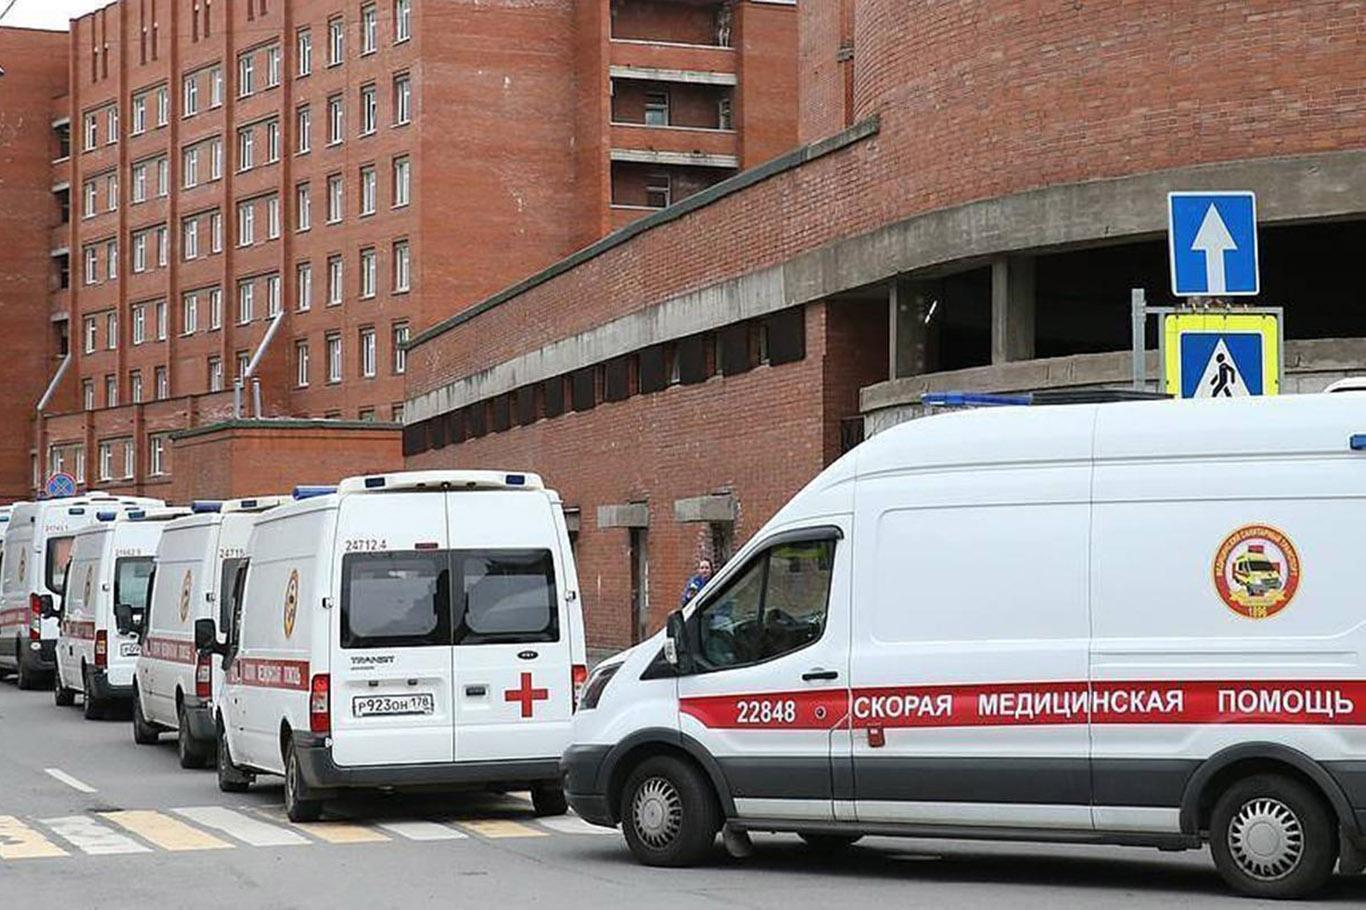 Russia’s death toll from coronavirus rises to 3,807